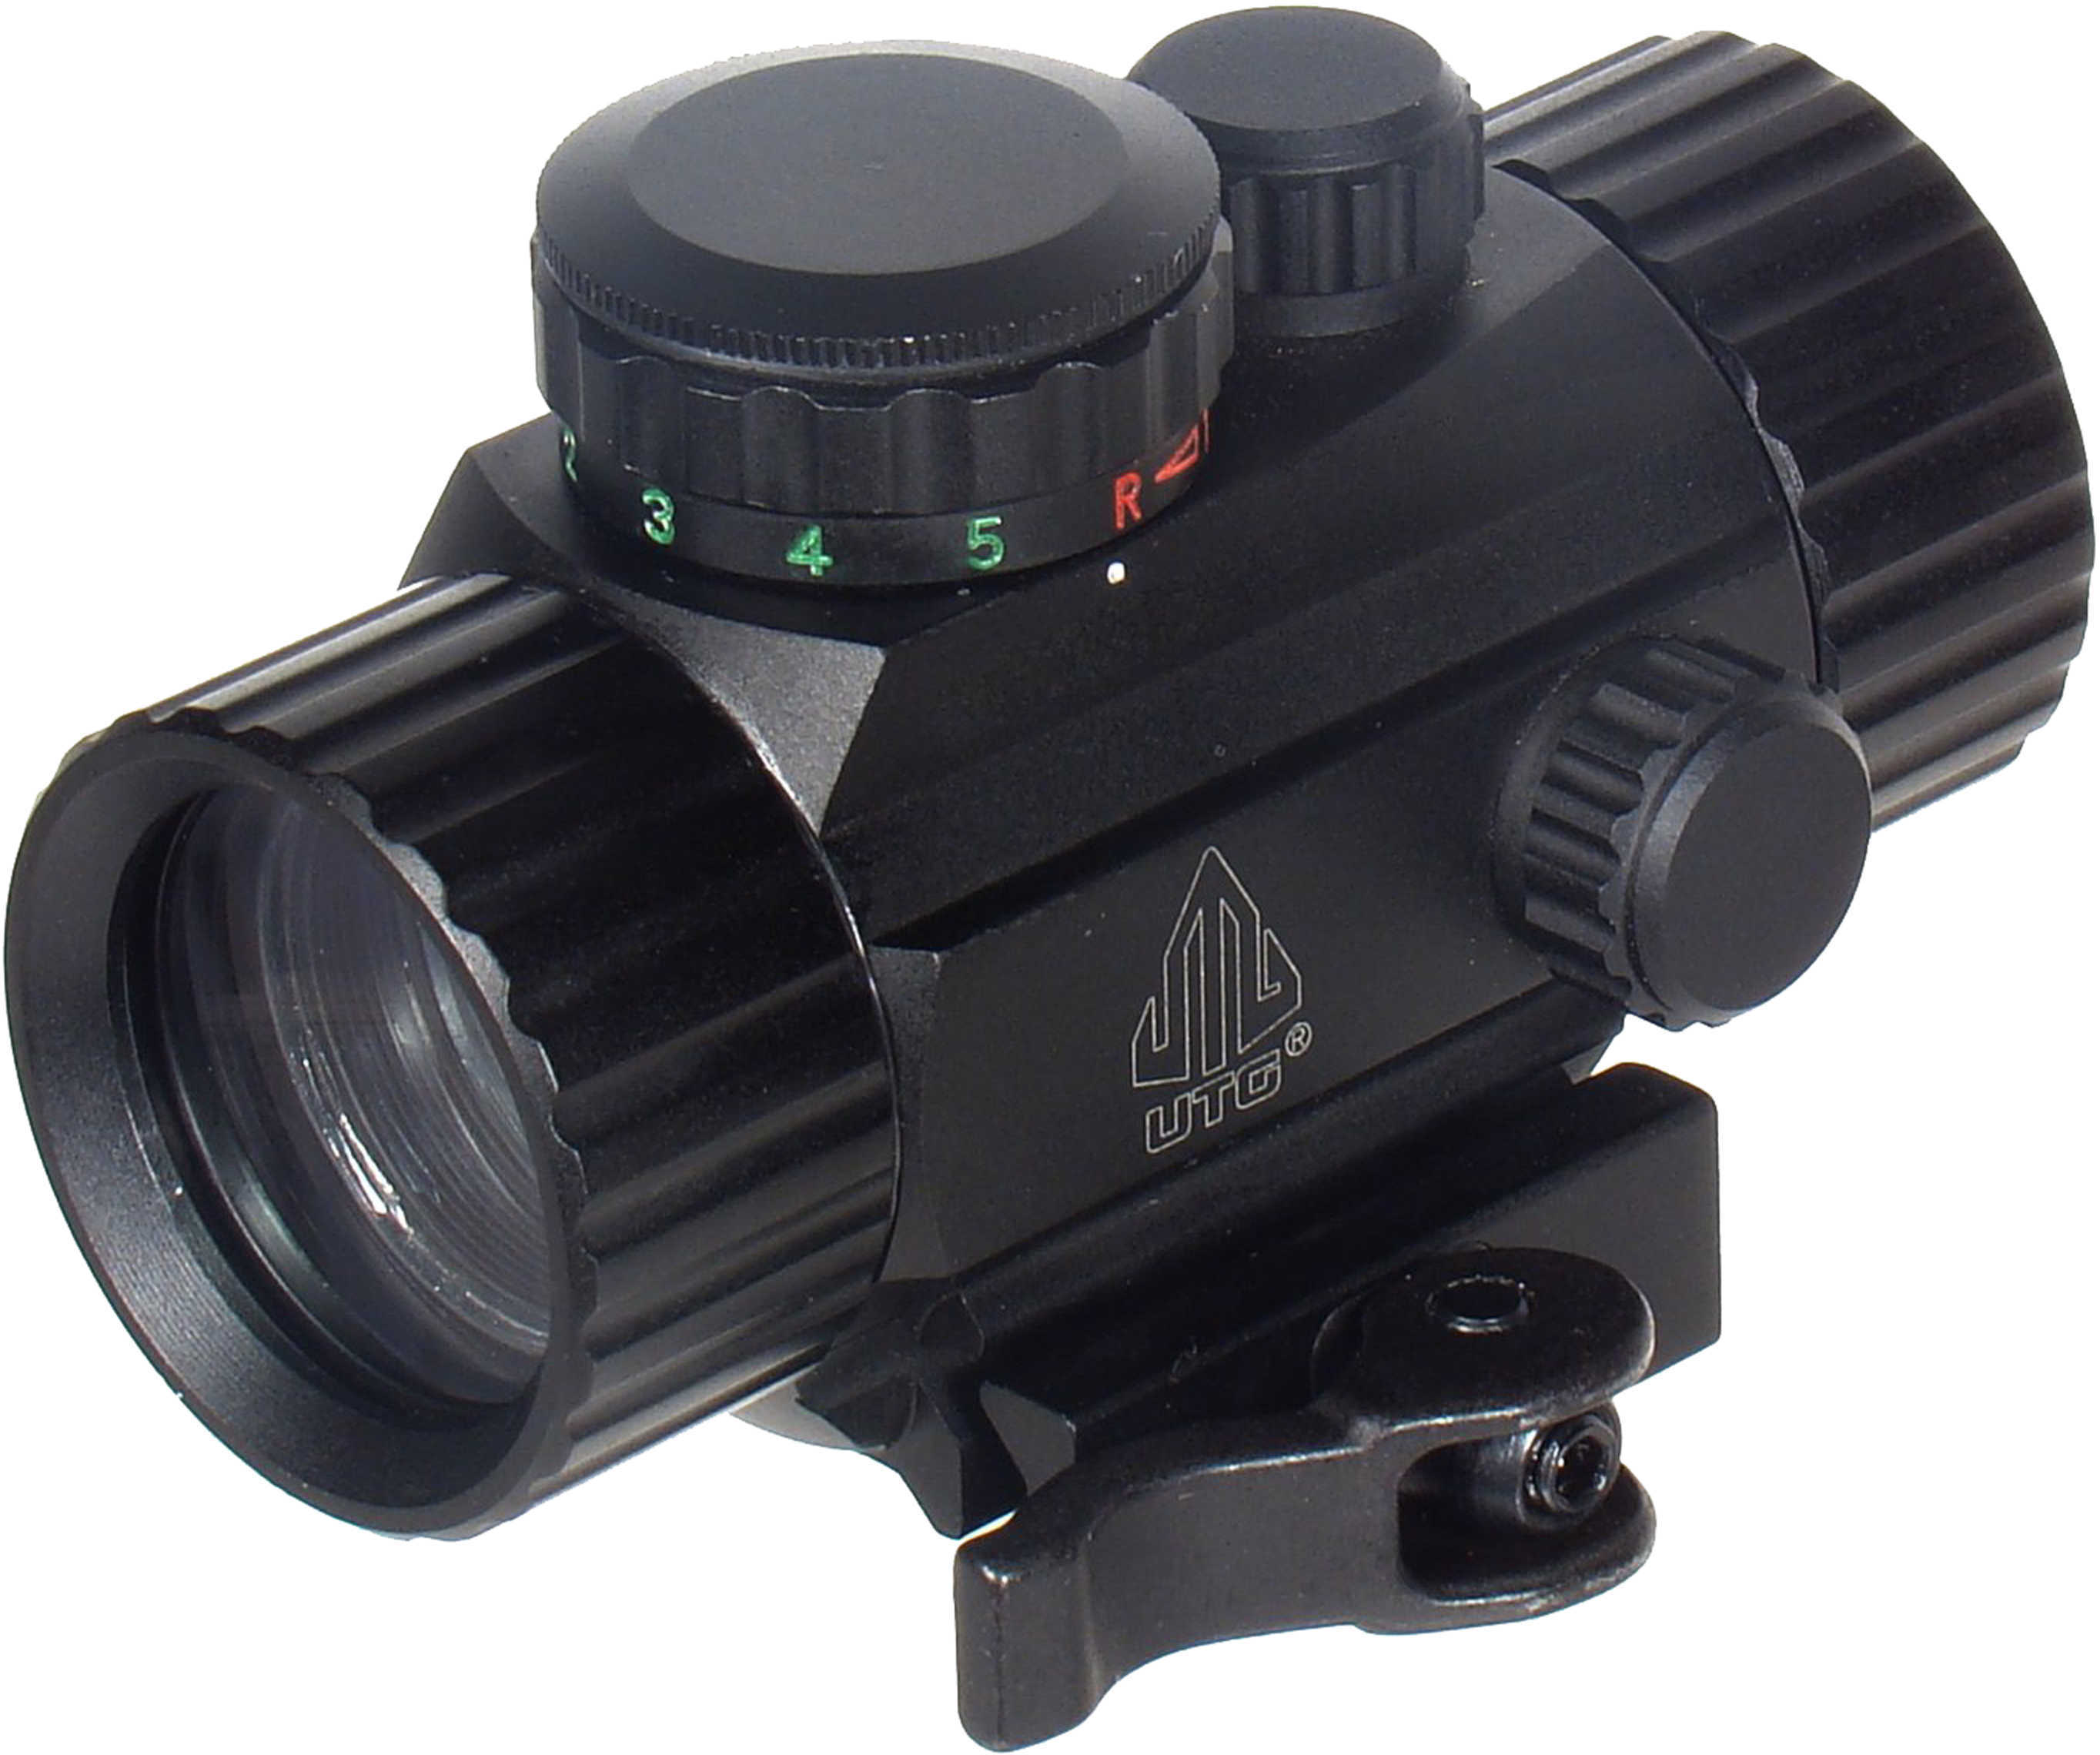 Leapers UTG 3.8" ITA Red/Green Circle Dot Sight With Integral QD Mount